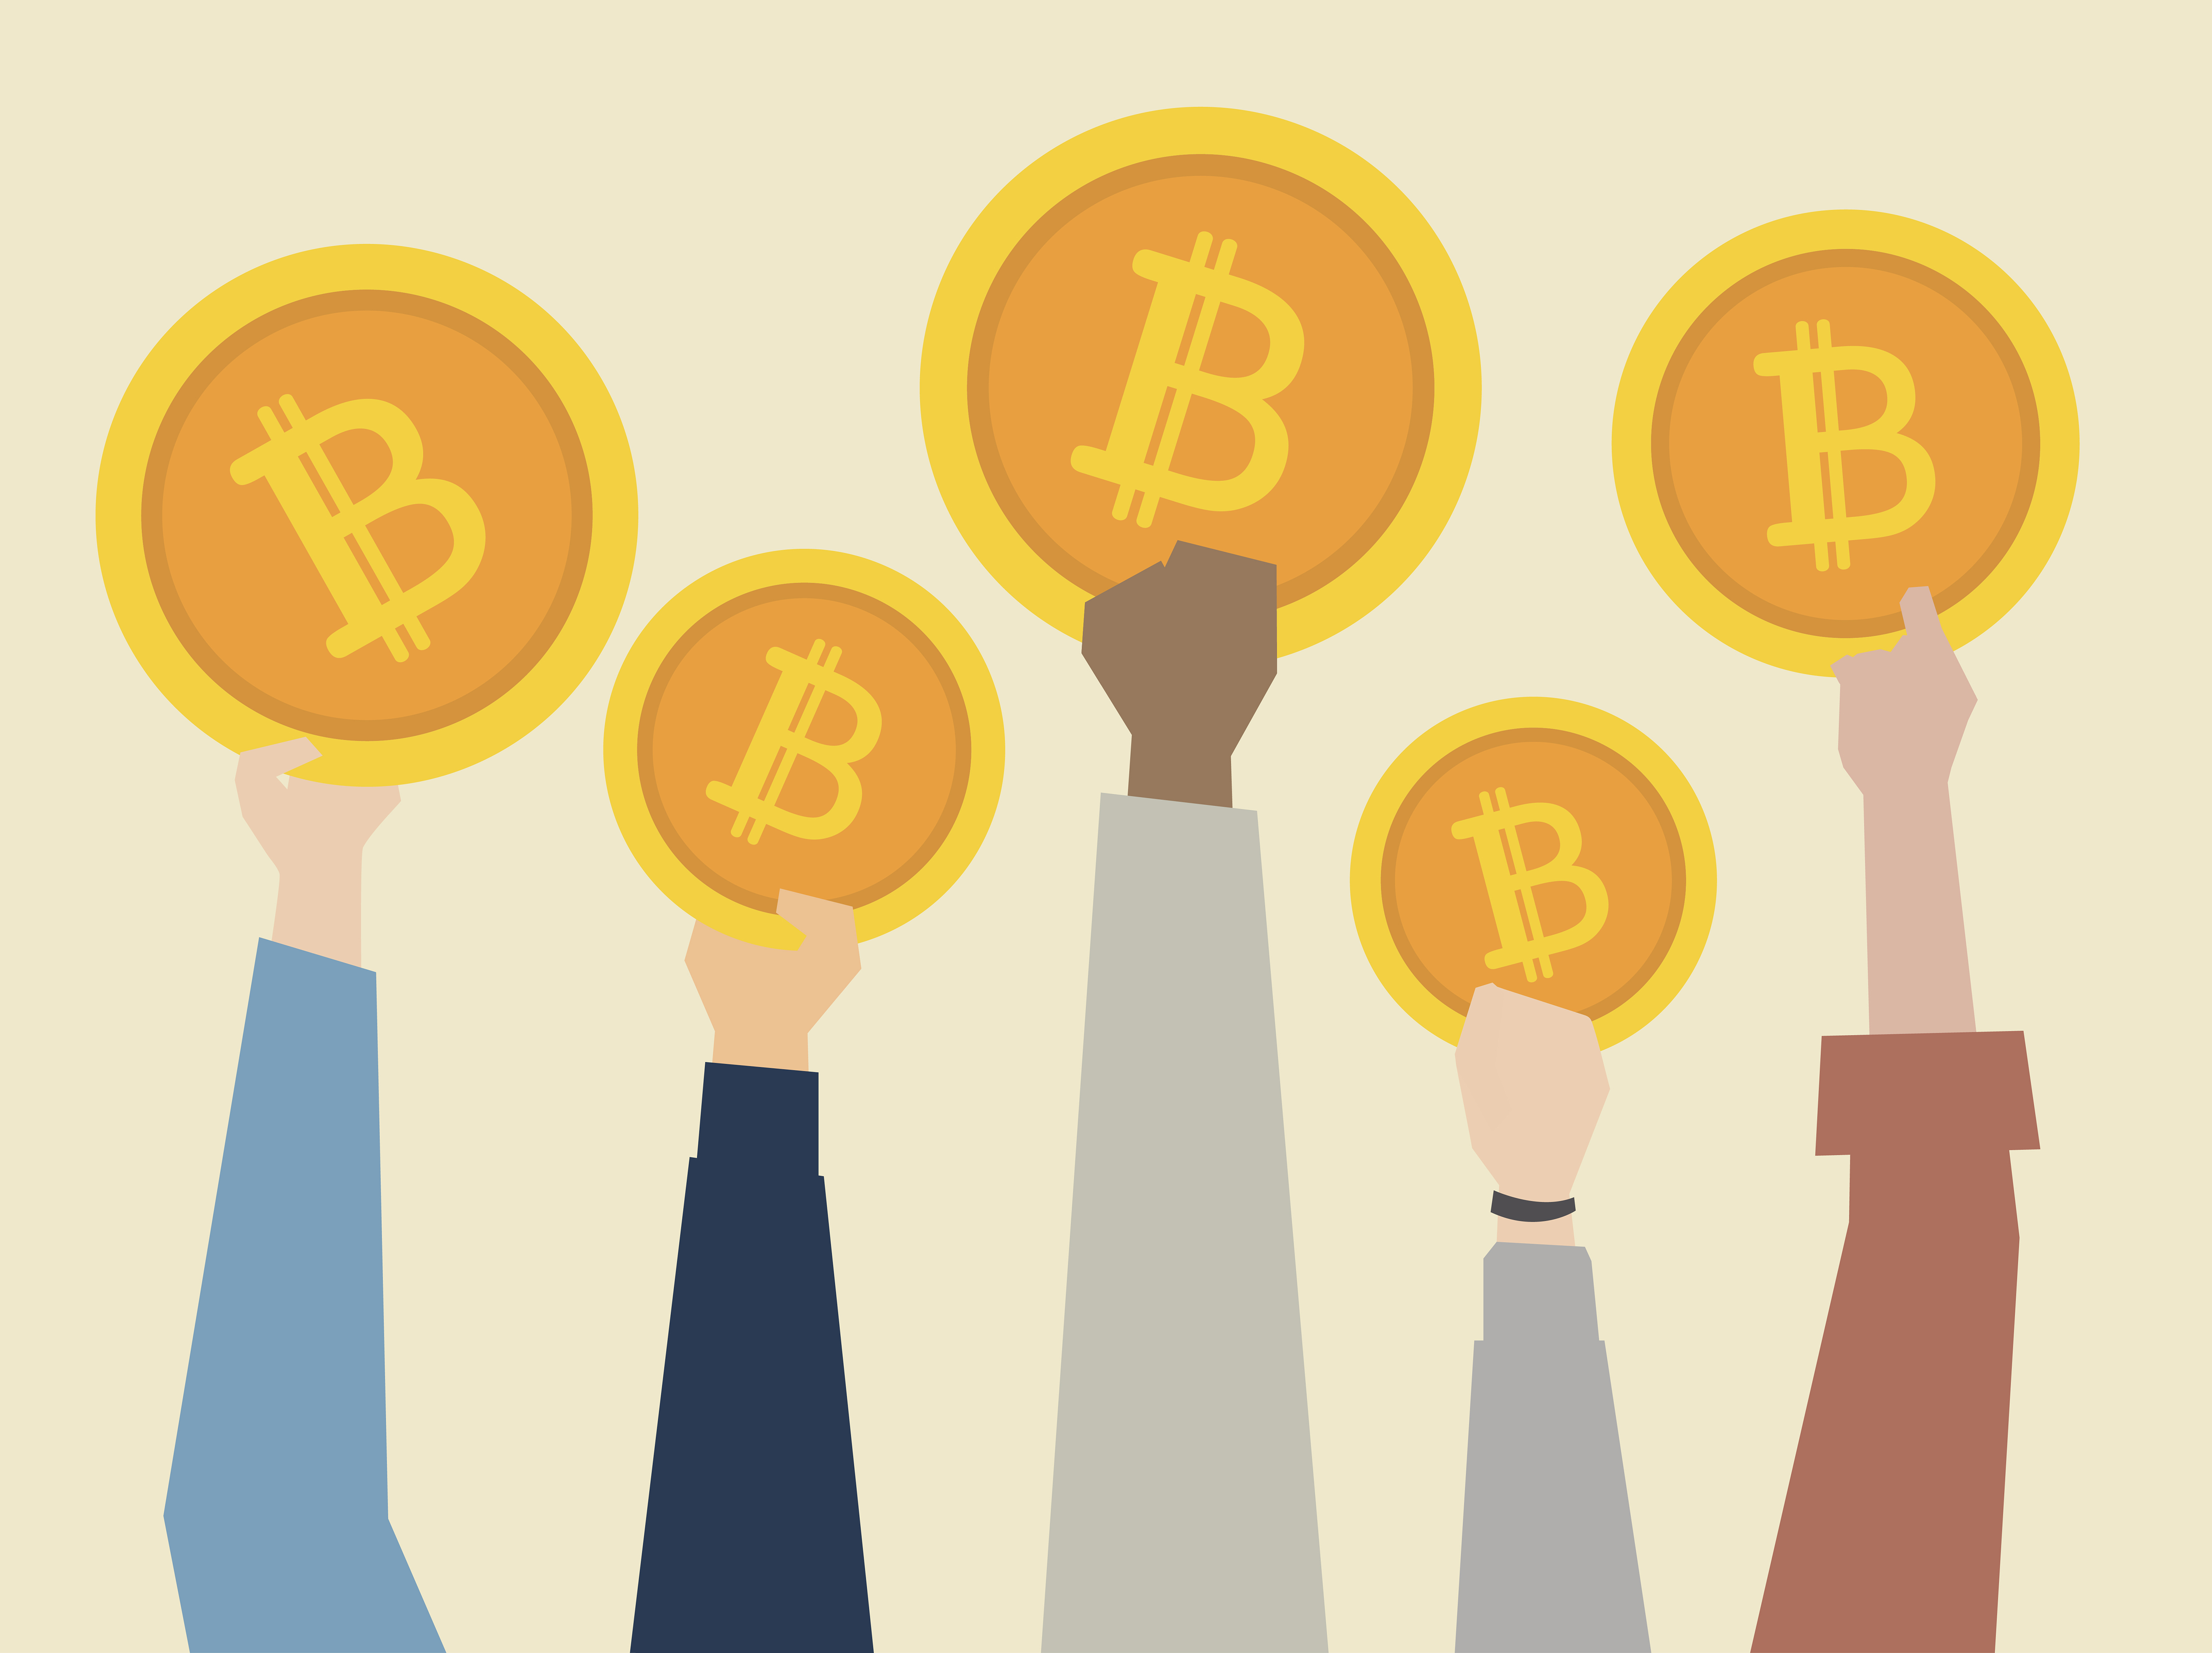 People holding up cryptocurrency illustration - Download ...